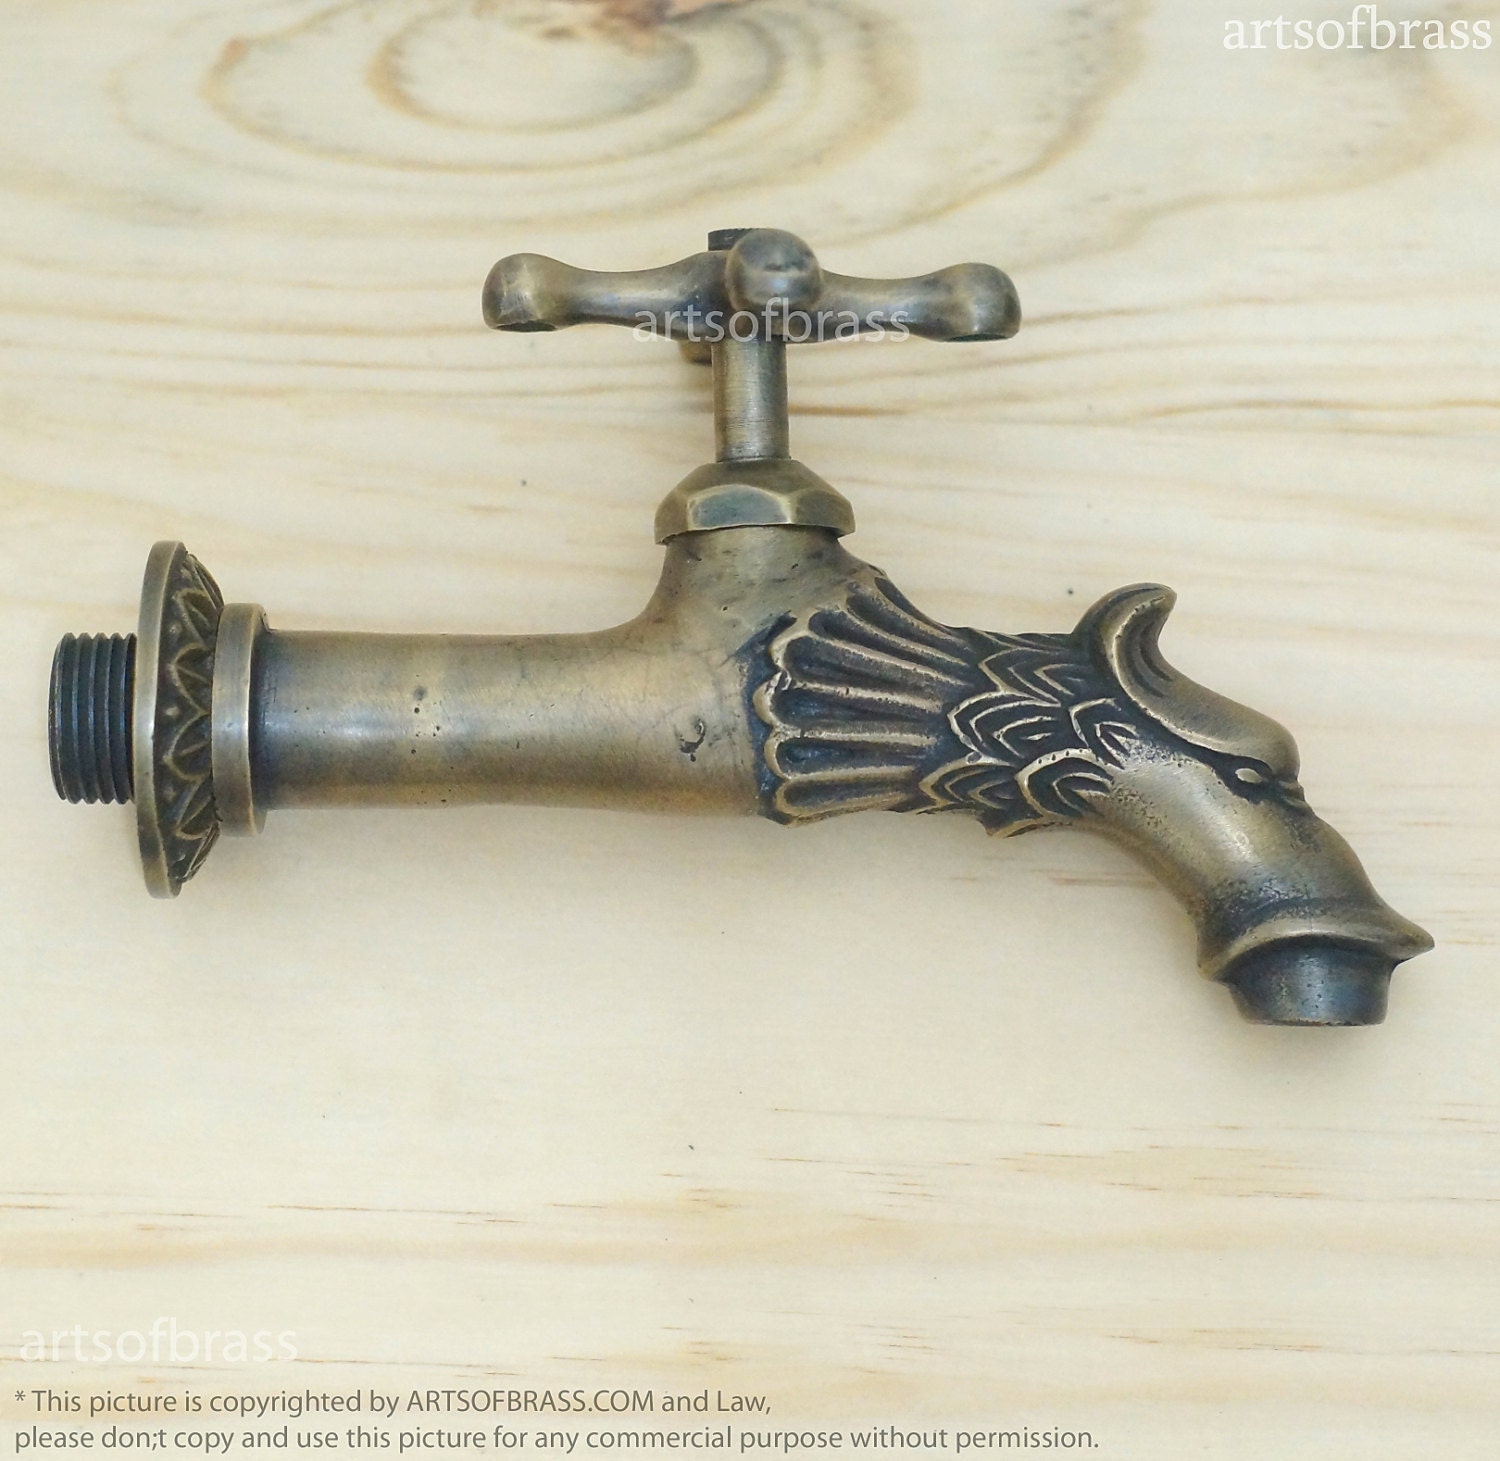 6.02 Inches Vintage Antique Brass Bathroom Sink Faucets - Etsy